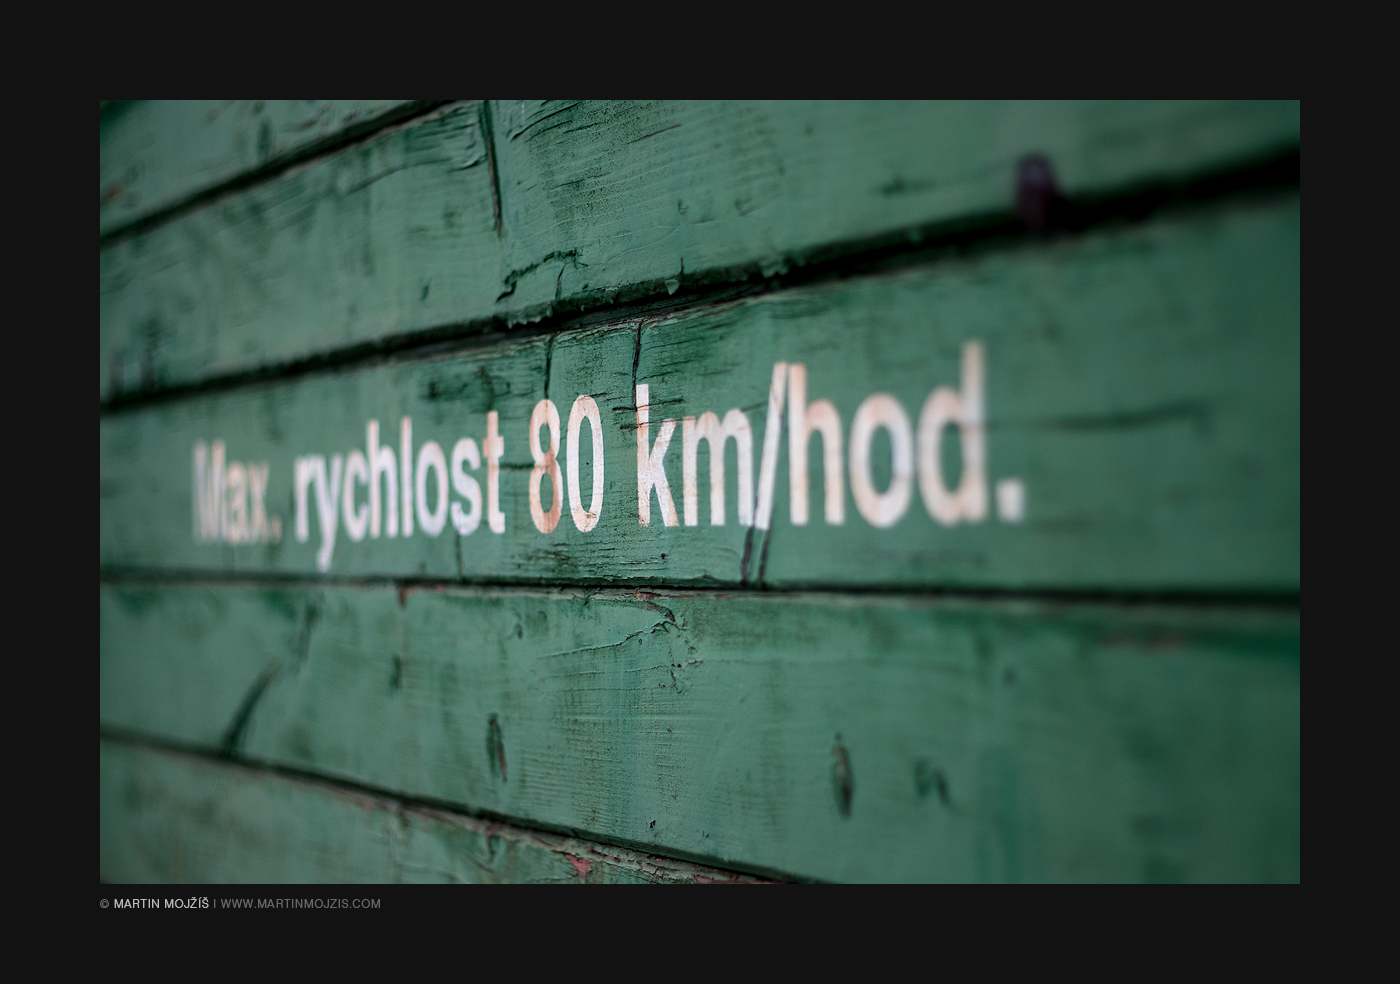 An inscription on the green-painted wooden wall of a railway carriage, indicating the maximum permitted speed of 80 km/h. Railway muzeum in Luzna near Rakovnik.